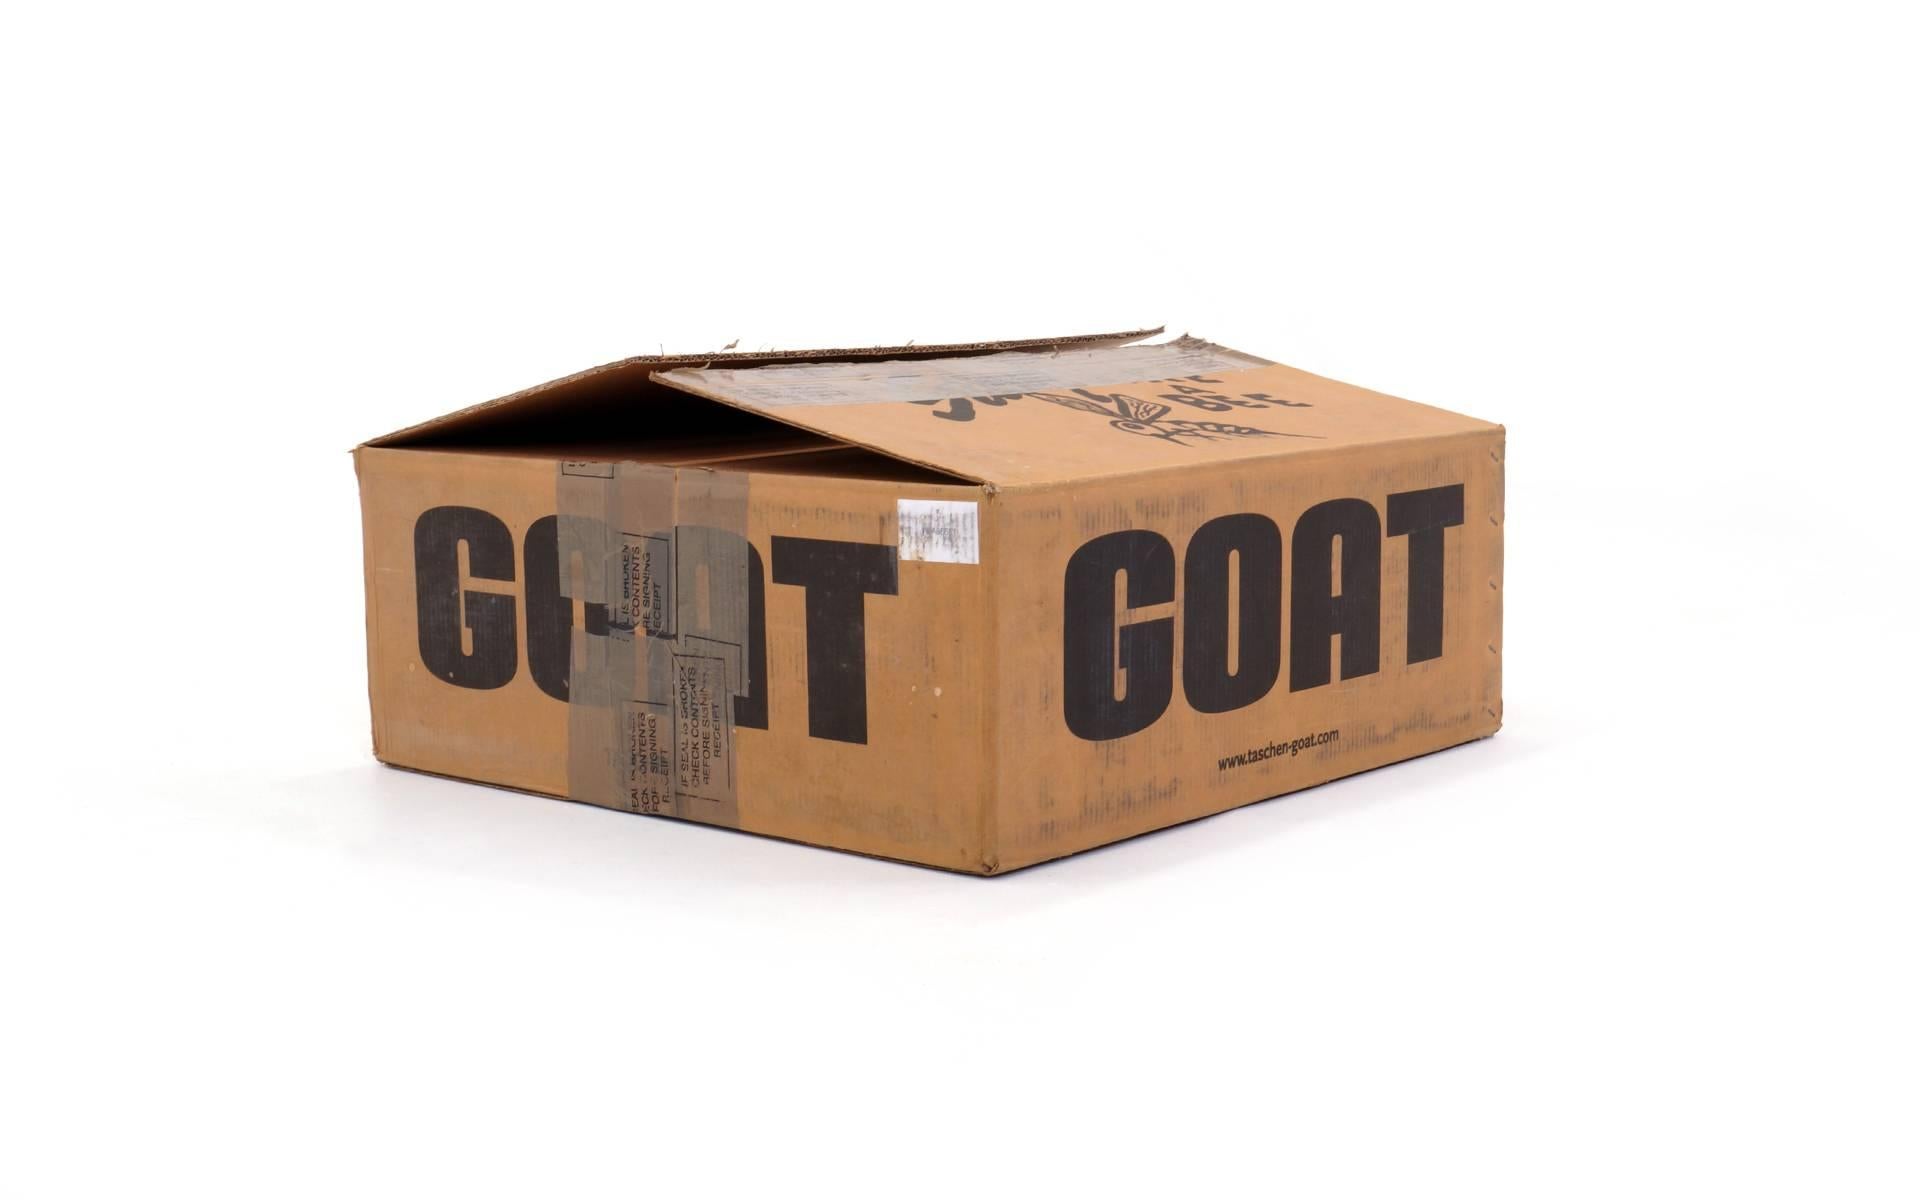 GOAT - The Greatest of All Time is a tribute to Mohammad Ali with art by Jeff Koons.  A 